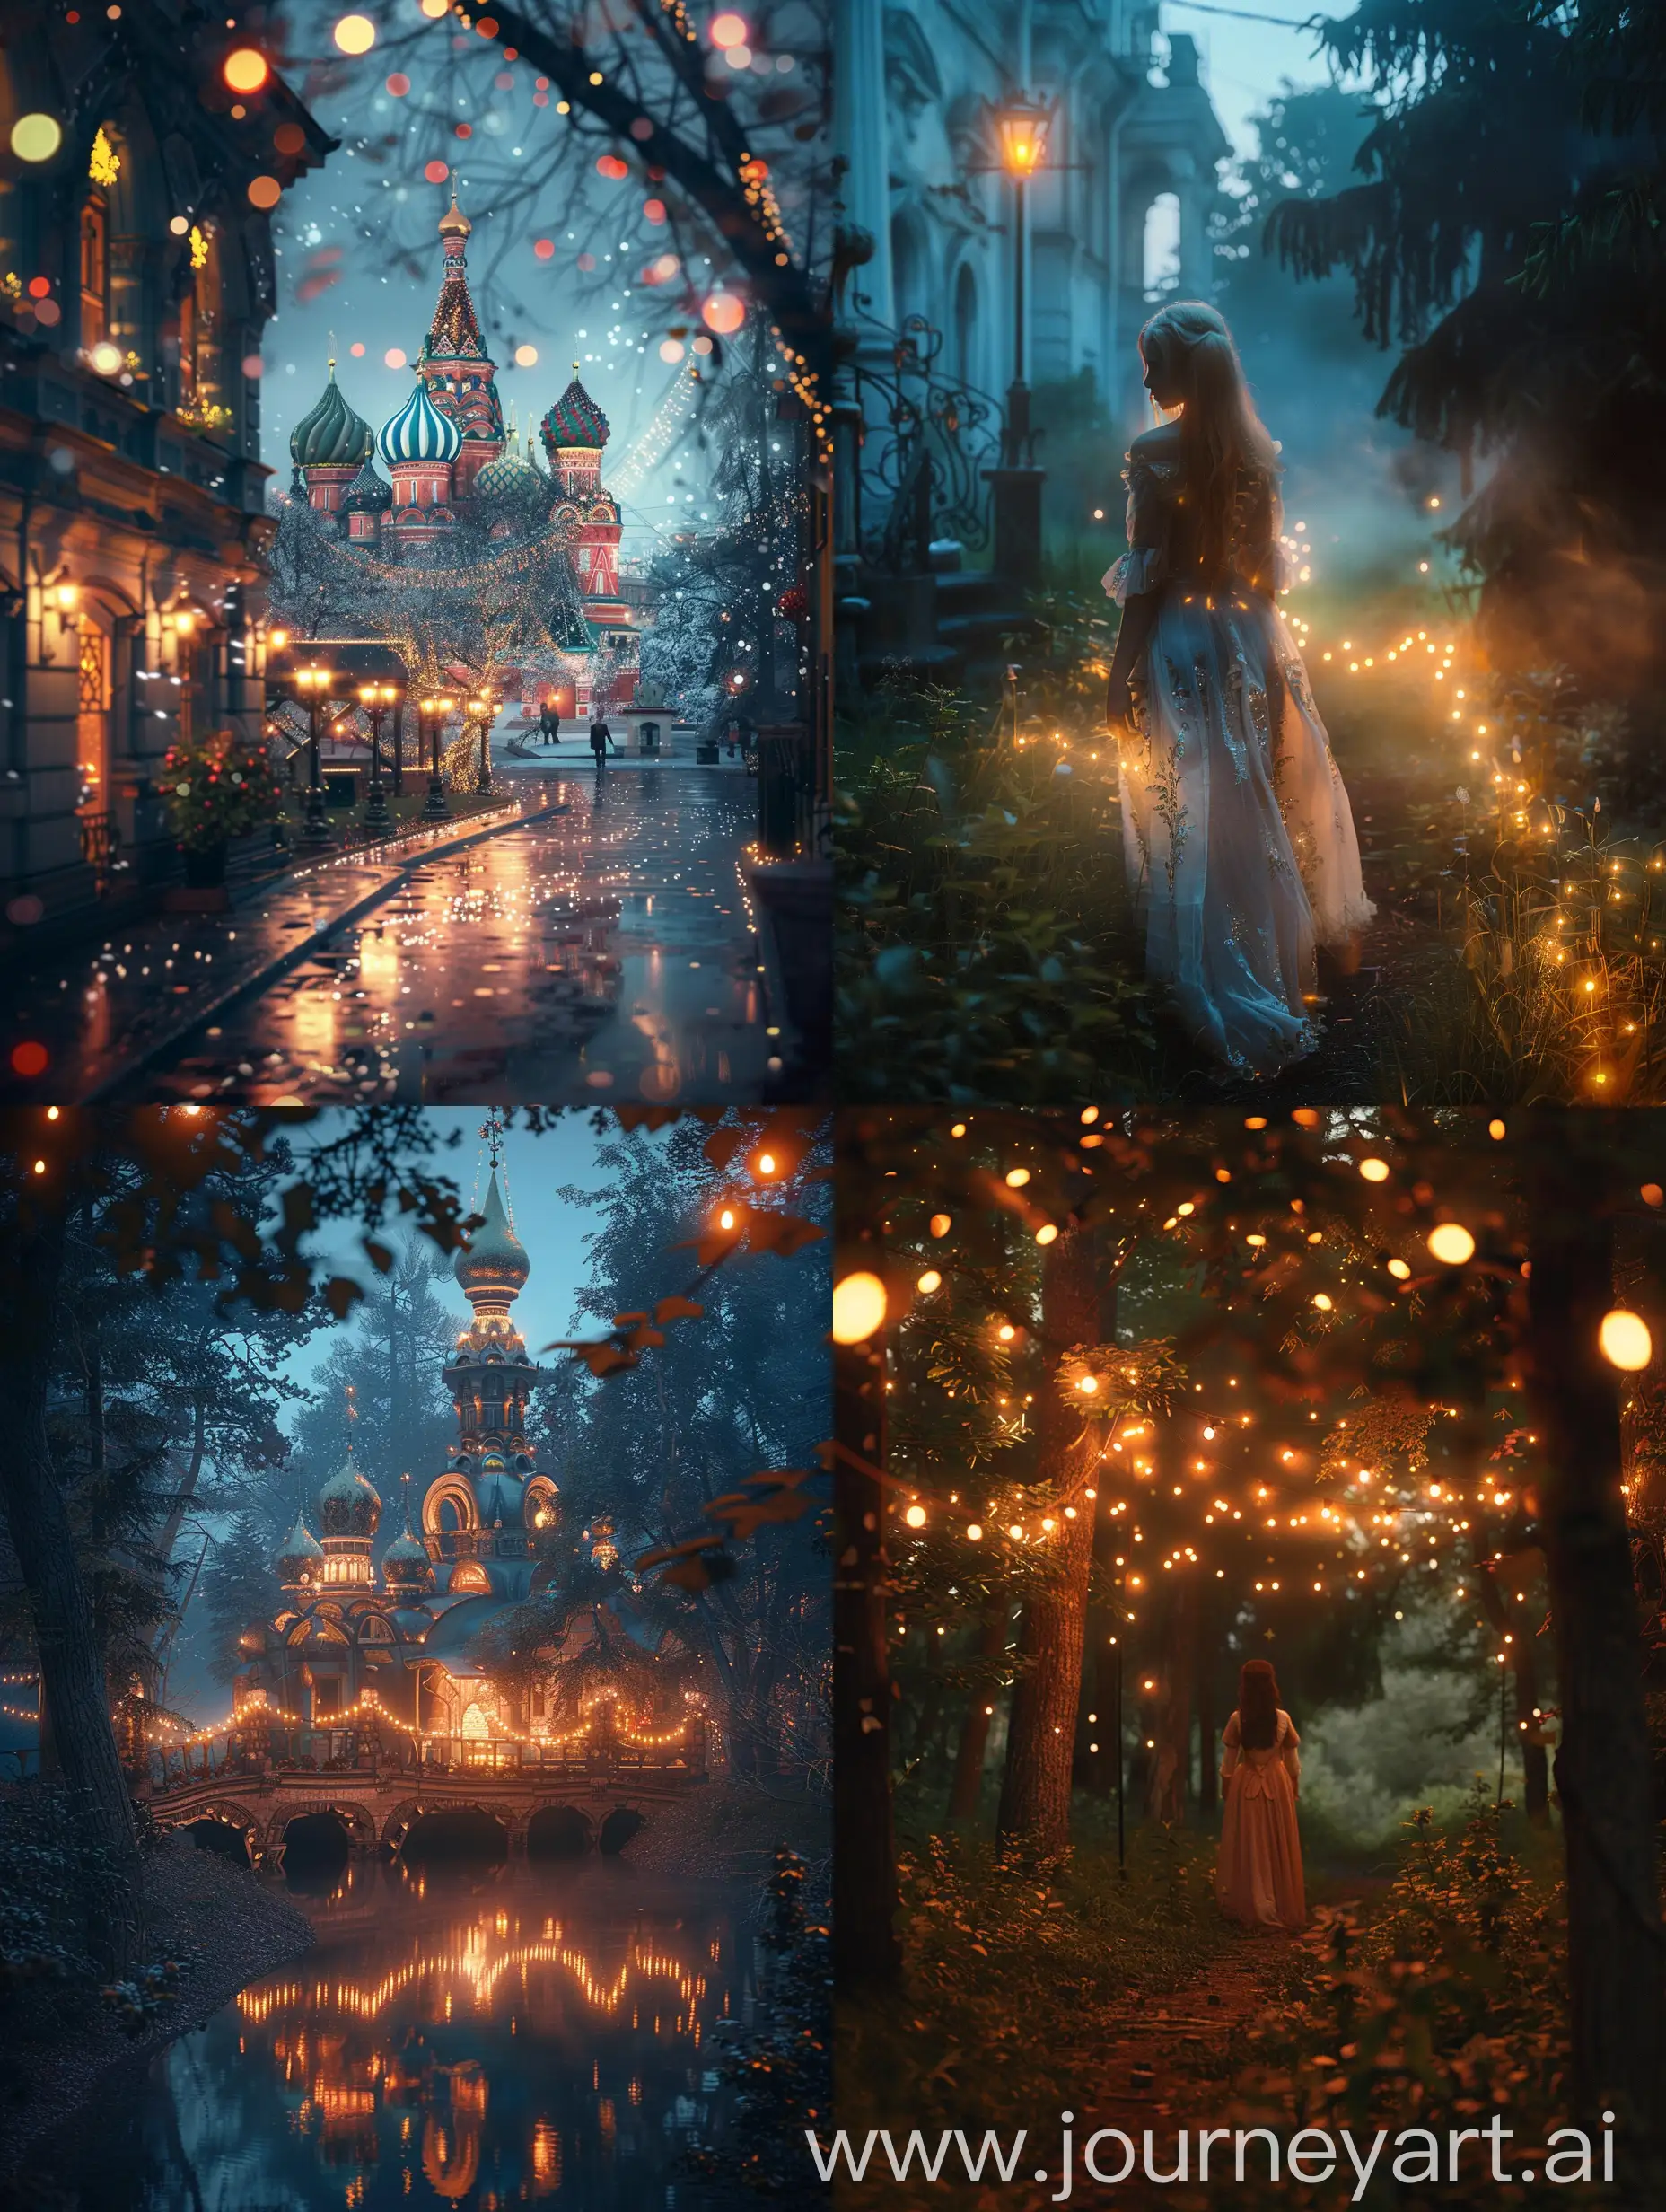 Russian fairytale the most classical image, magic, evening, lights, ultarealistic photos, 4k, cinematic